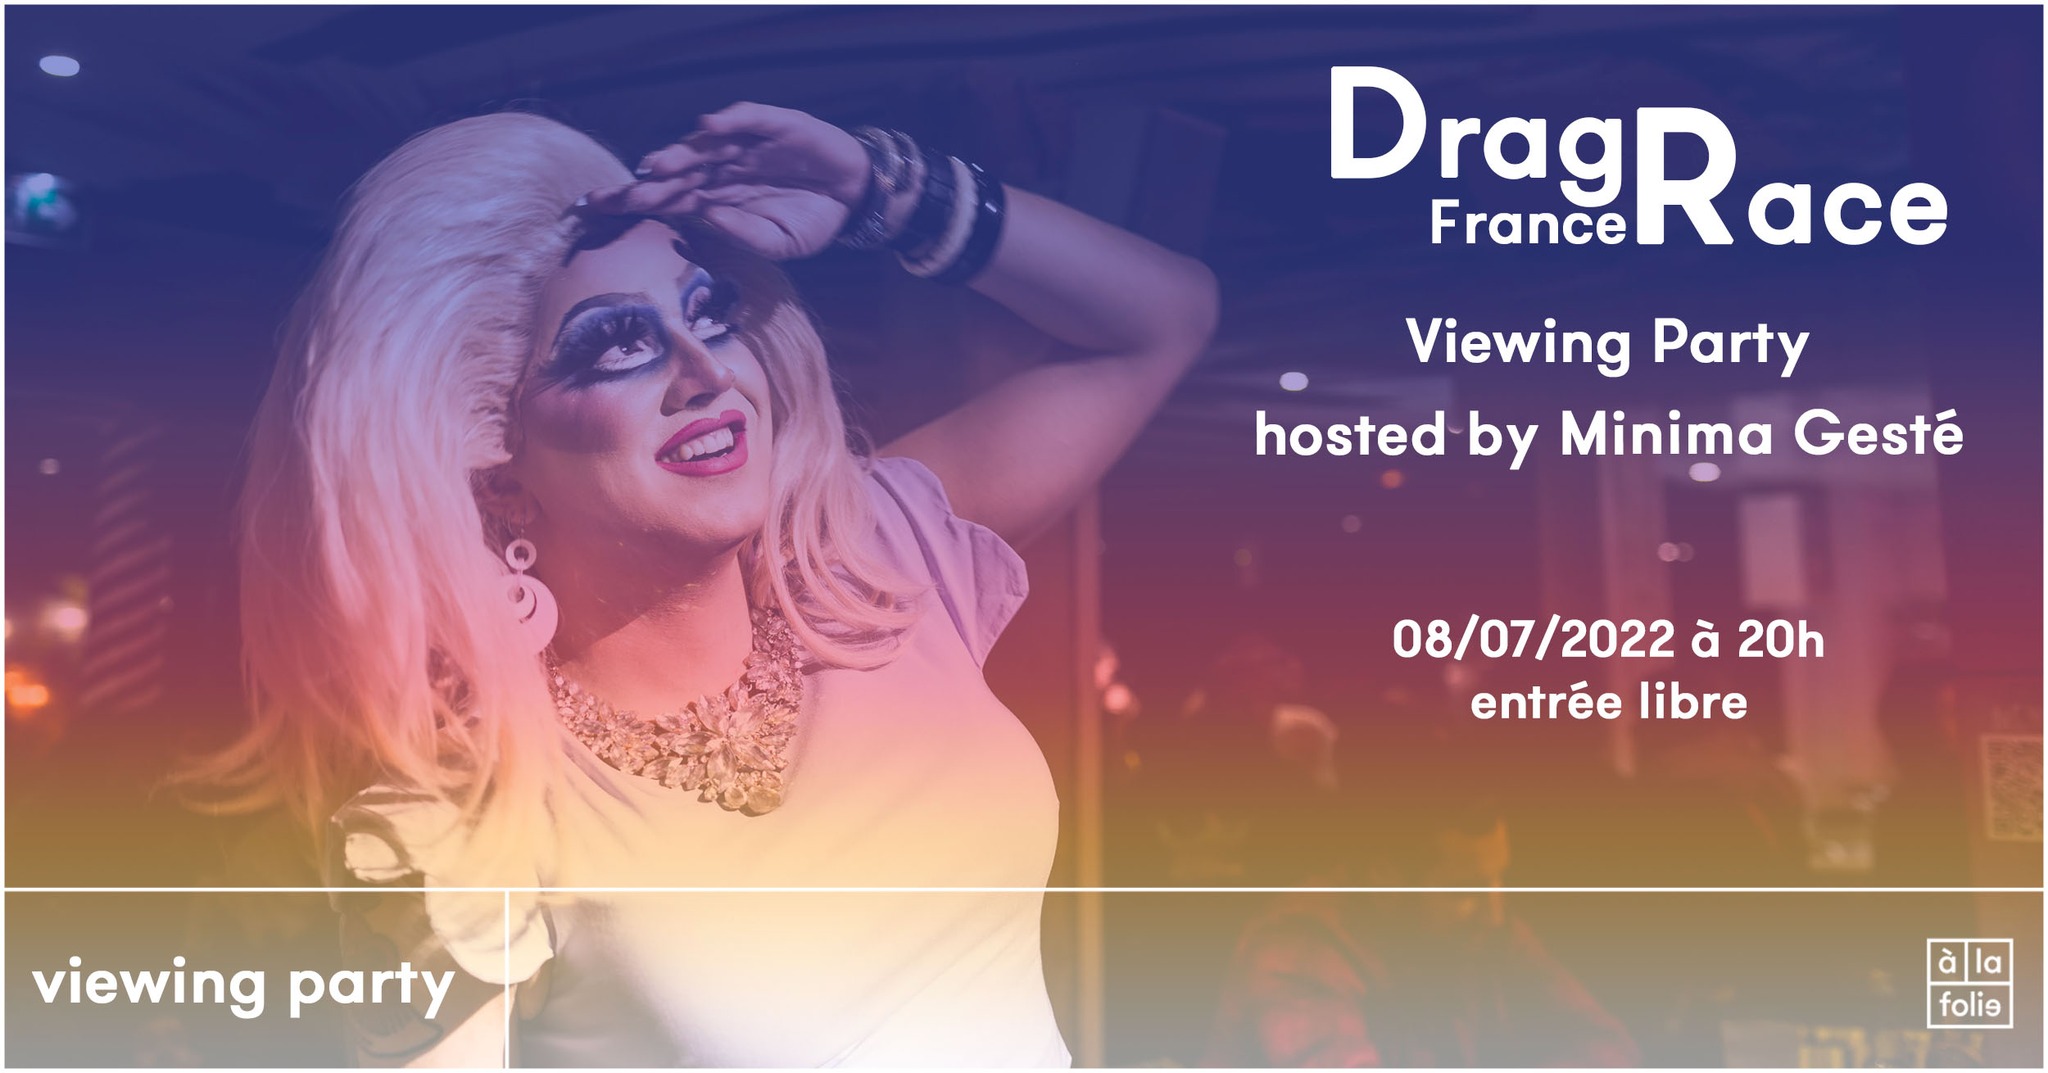 Drag Race Viewing Party hosted by Minima Gesté